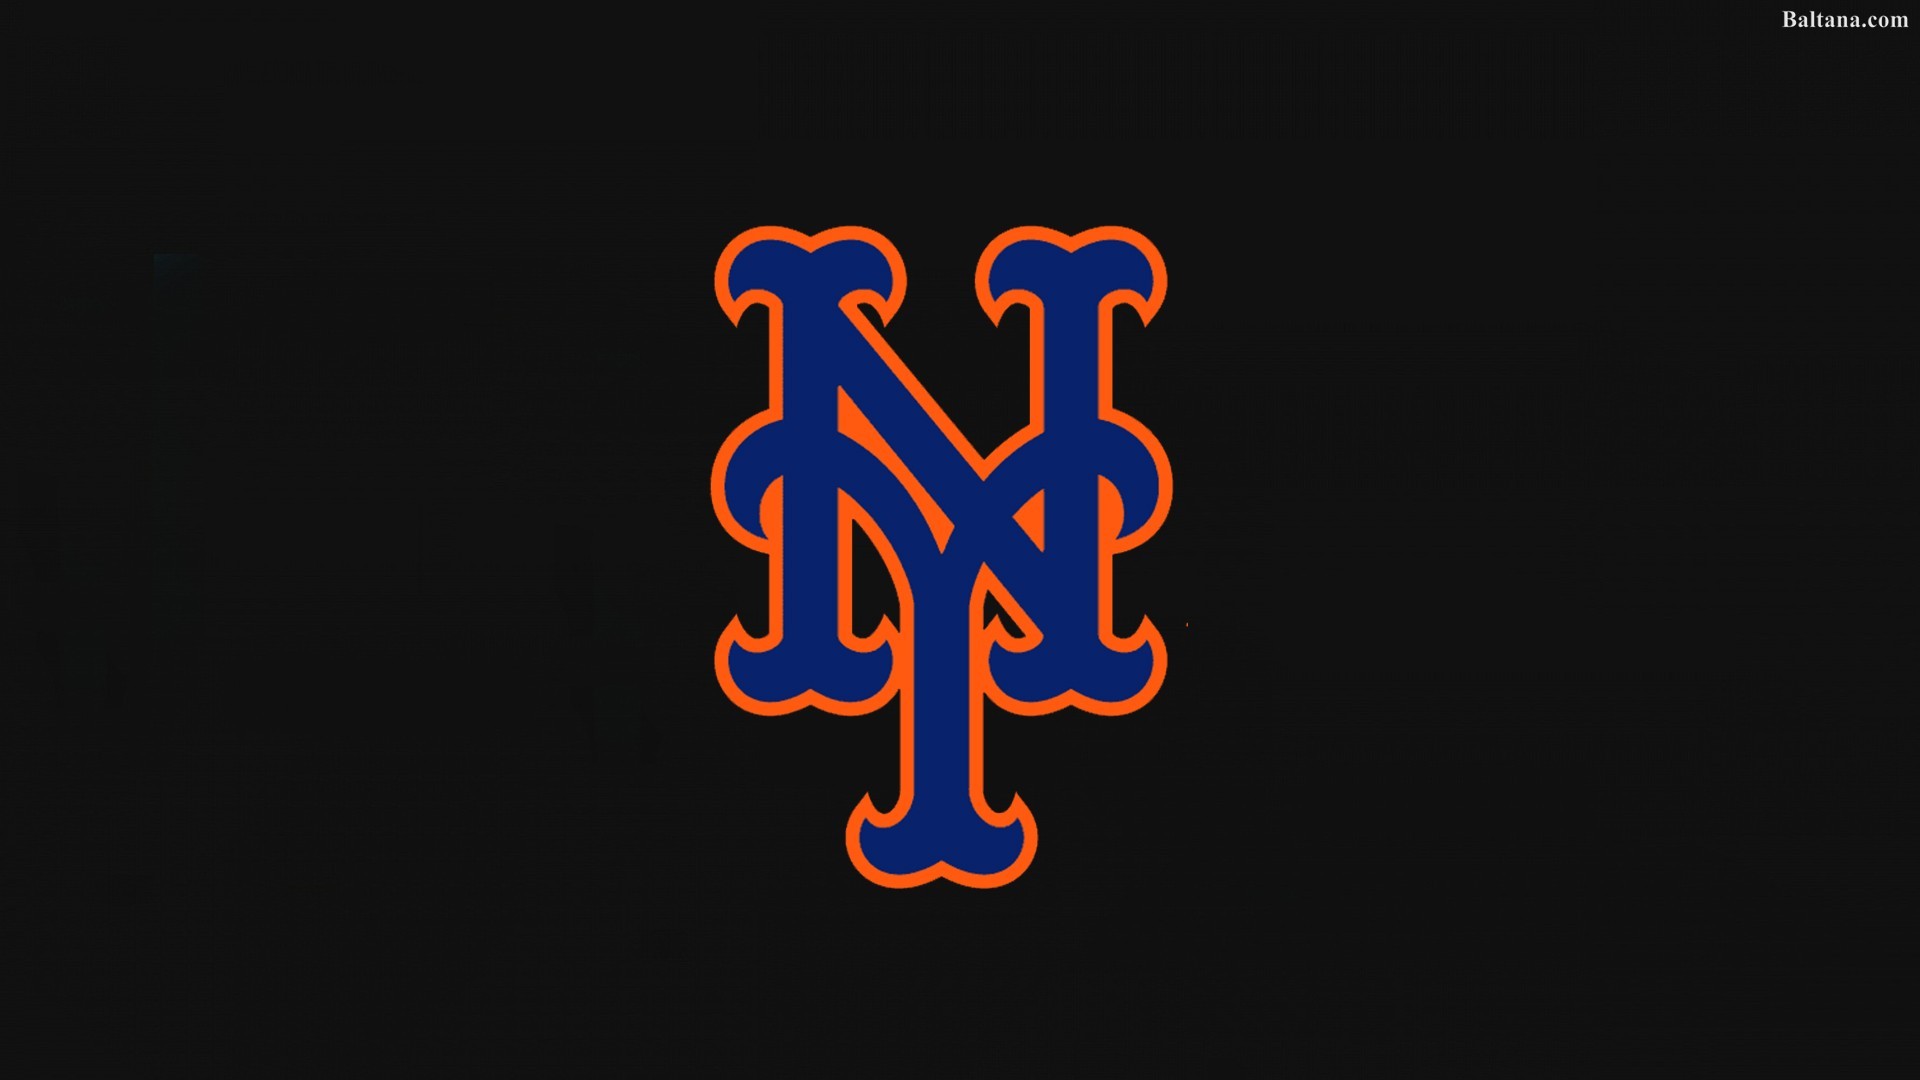 NY Mets wallpaper by eddy0513  Download on ZEDGE  aa3c